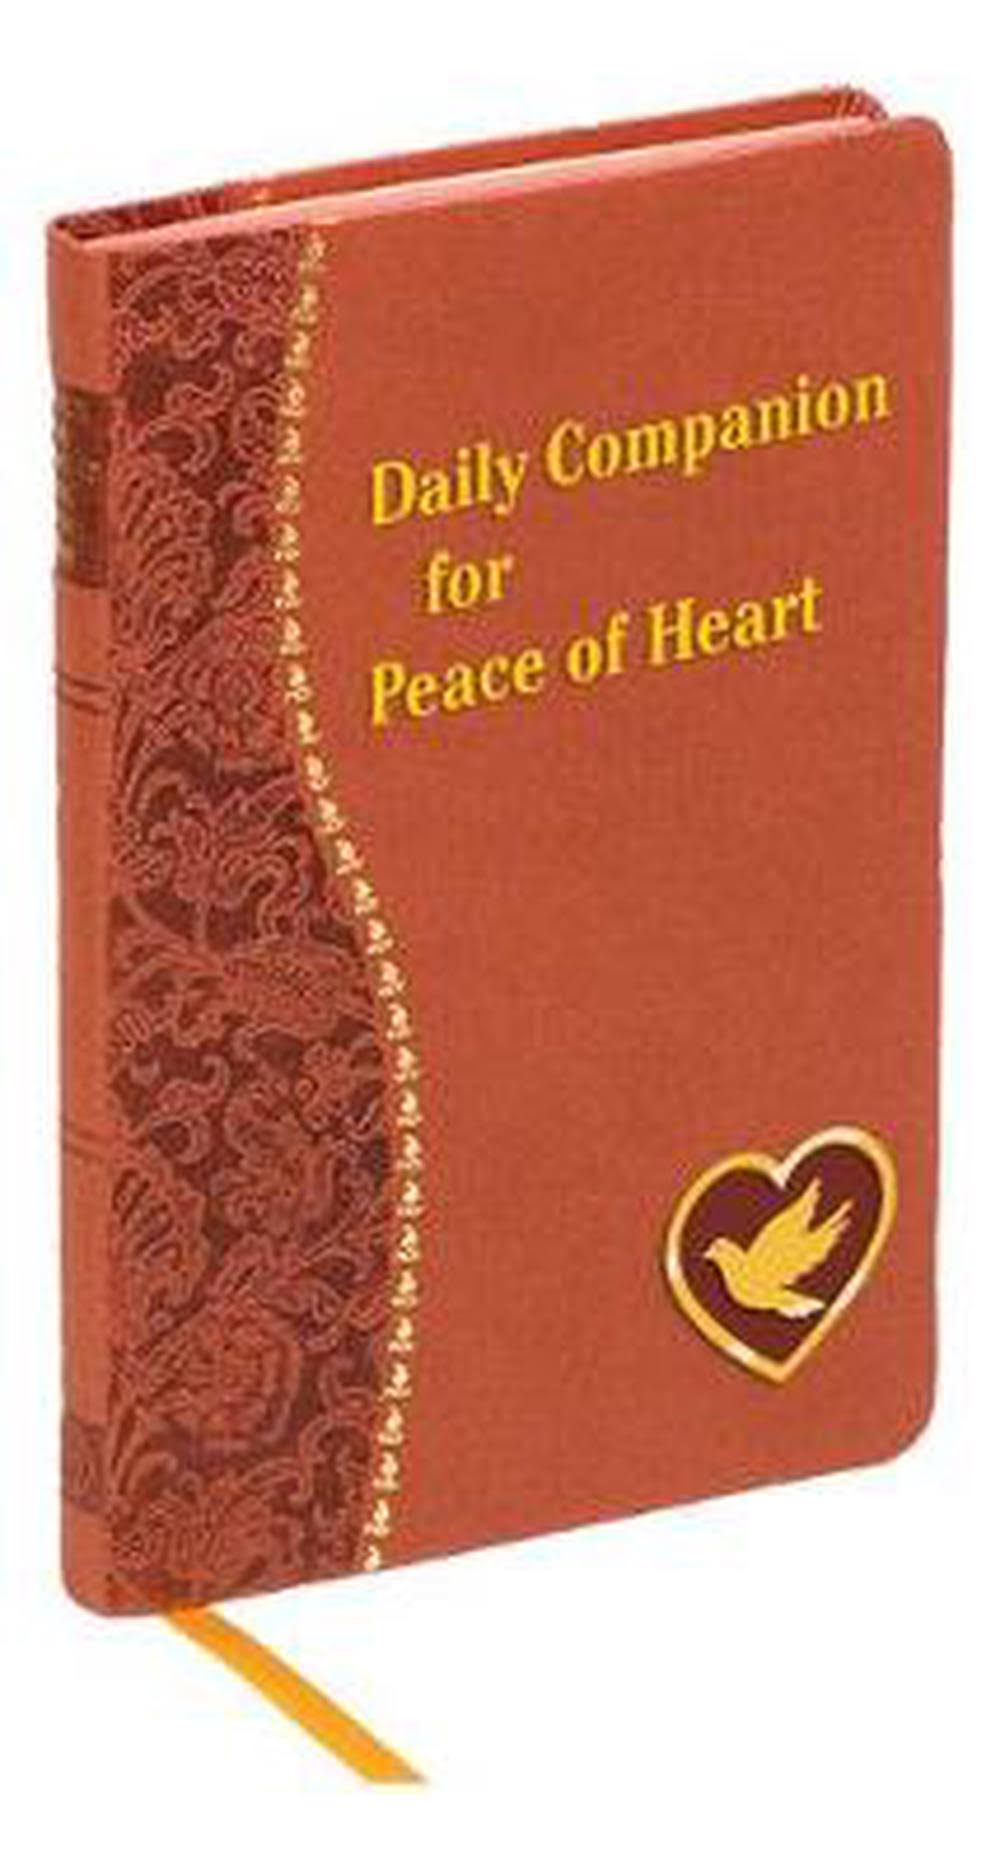 Daily Companion for Peace of Heart [Book]